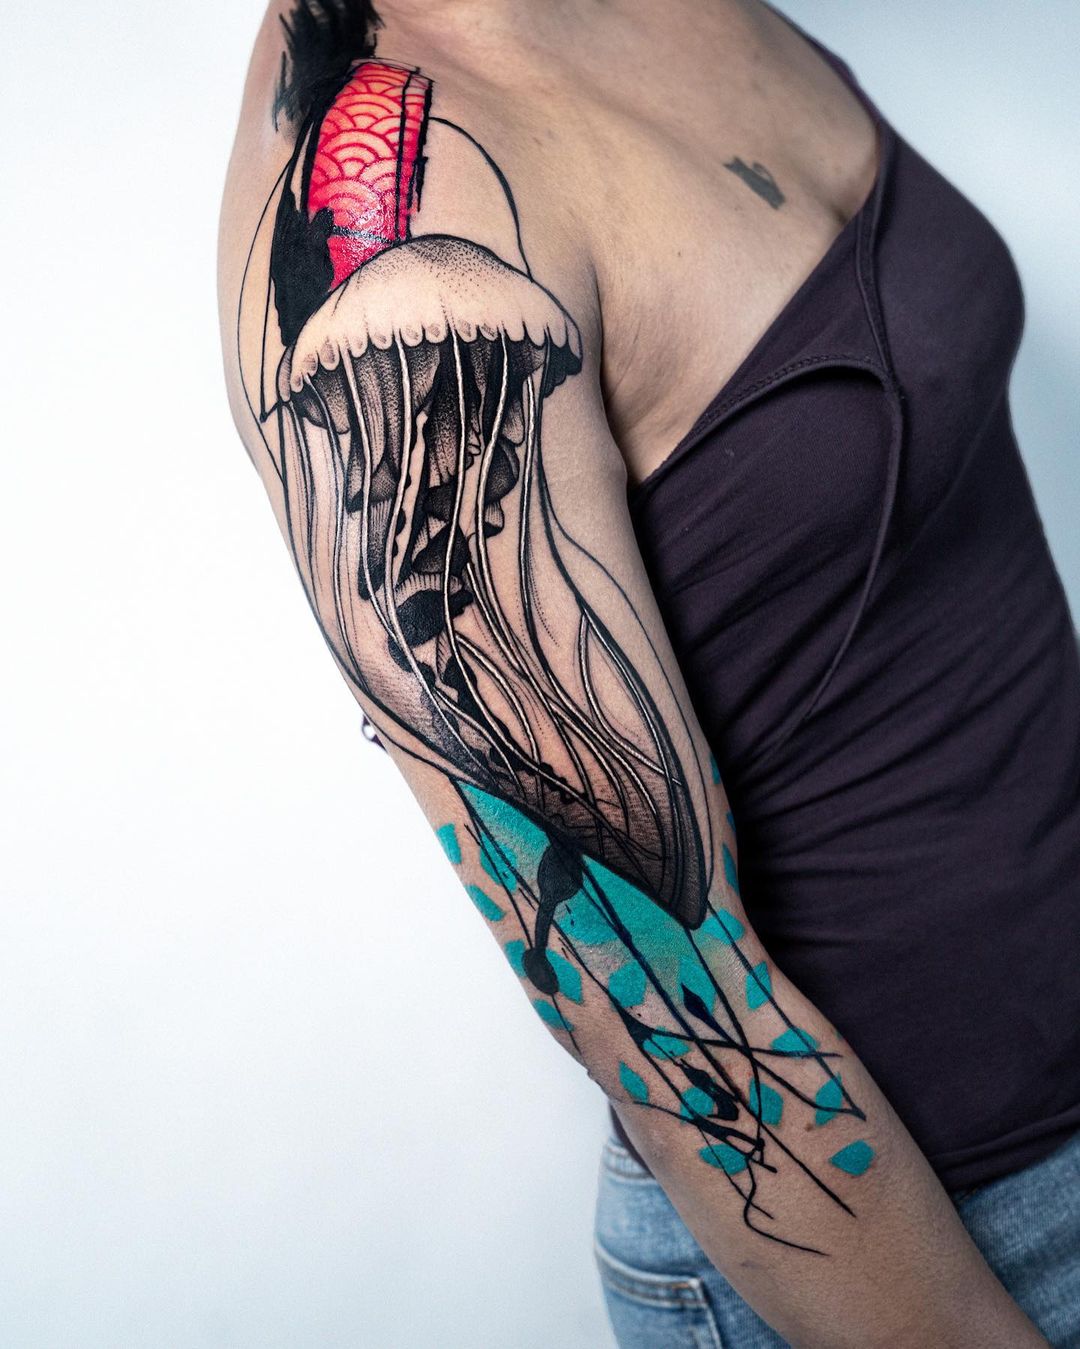 🔥 🔥 Abstract Tattoo: 36 designs curated for you! 🔥🔥